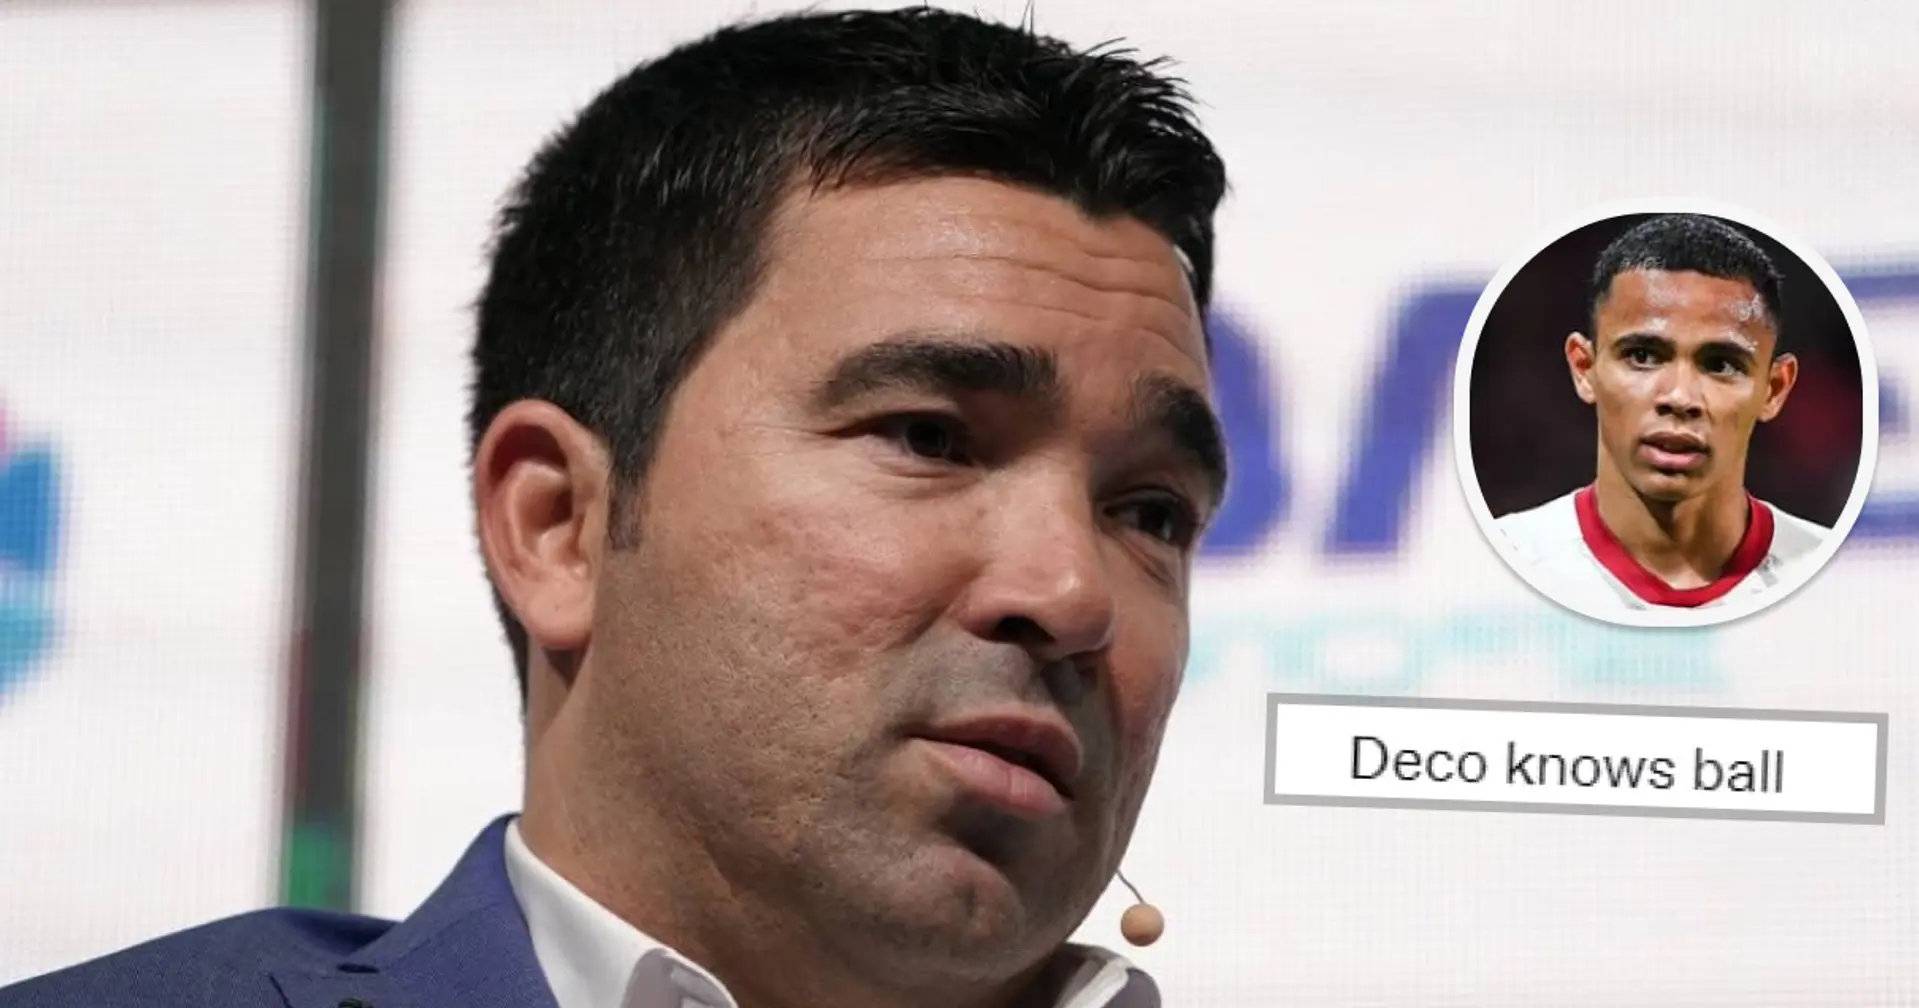 'Damn, bring him in ASAP' - fans react as Deco gives Barca scouting report on yet another Brazilian player